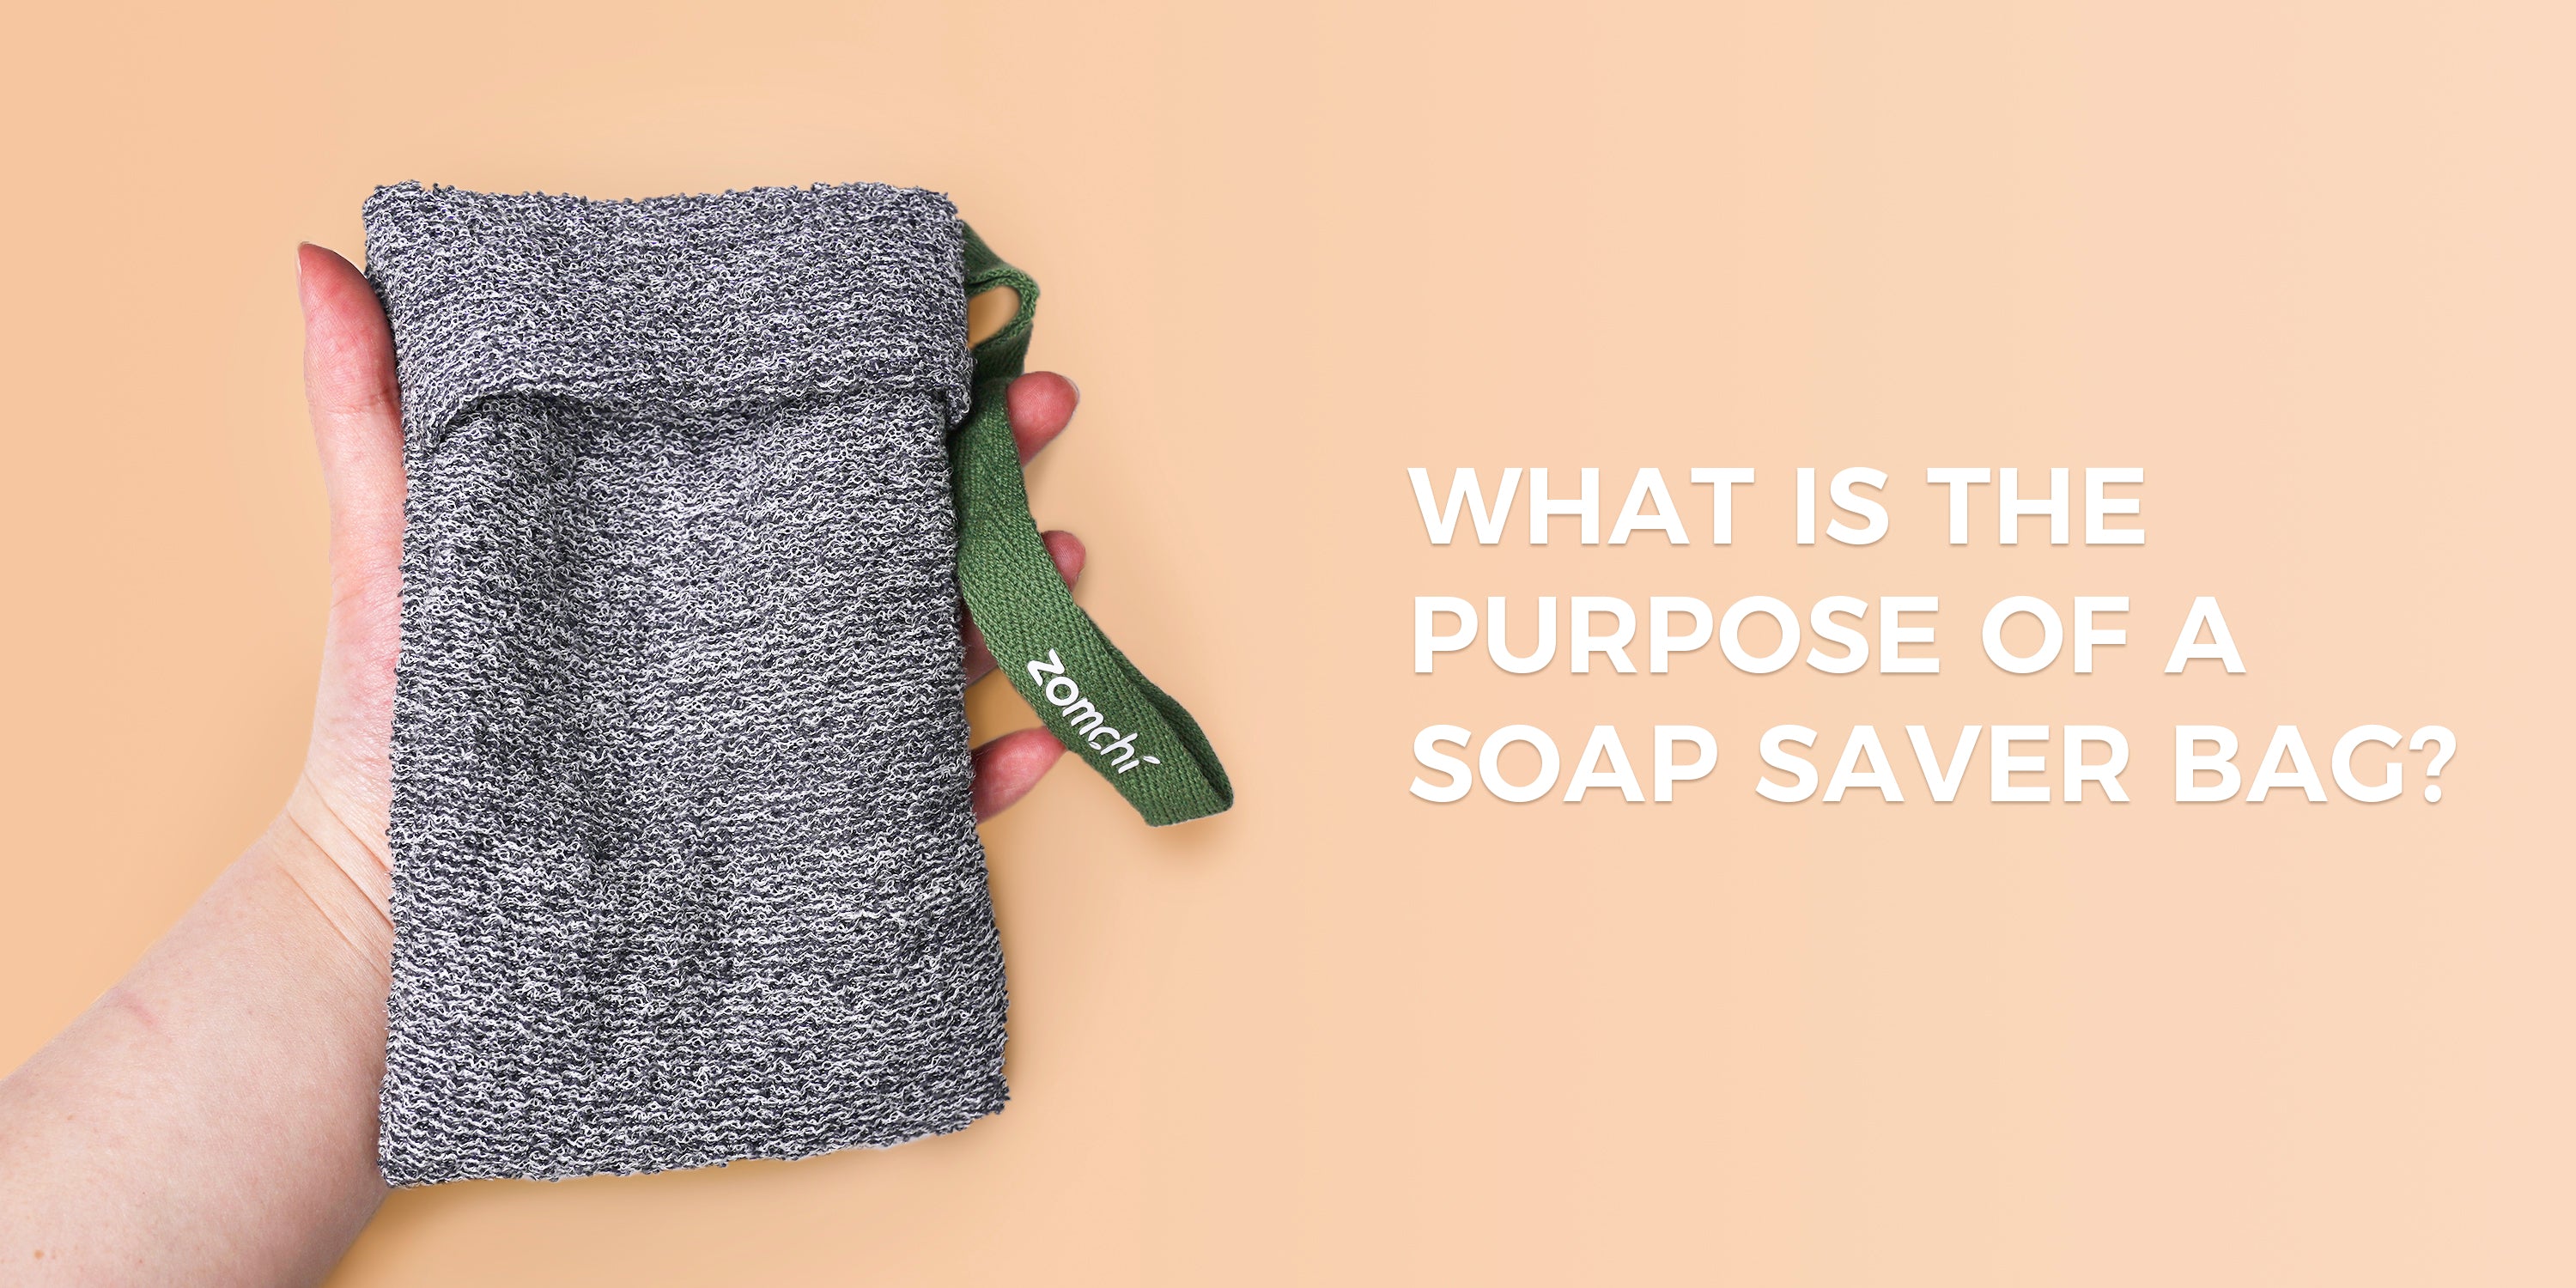 What is the purpose of a soap saver bag?